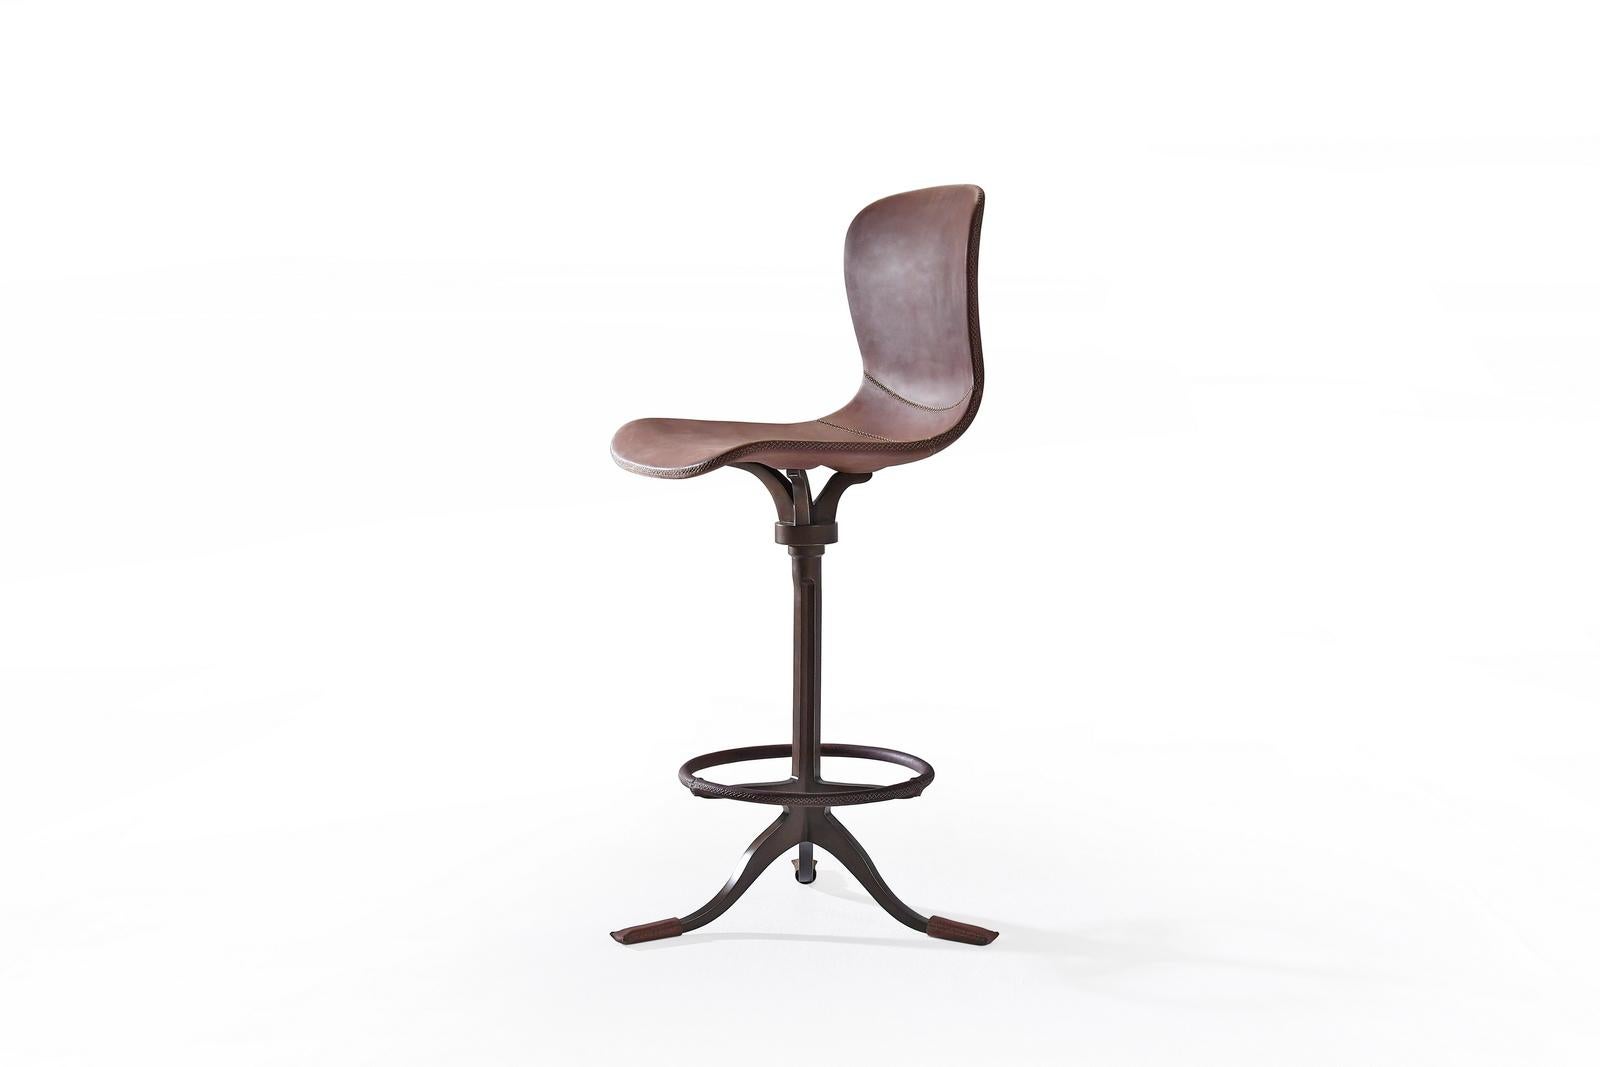 Model: 2 x PT473 counter height chair + Swivel + footrest ring.
Seat: Leather.
Seat color: Truffe (Dark Brown).
Base: PT473 sand cast brass.
Base finish: Brushed Brown.
Dimensions: 43 x 52 x 99 (seat height 65 cm).
(W x D x H) 16.9 x 20.5 x 39 inch